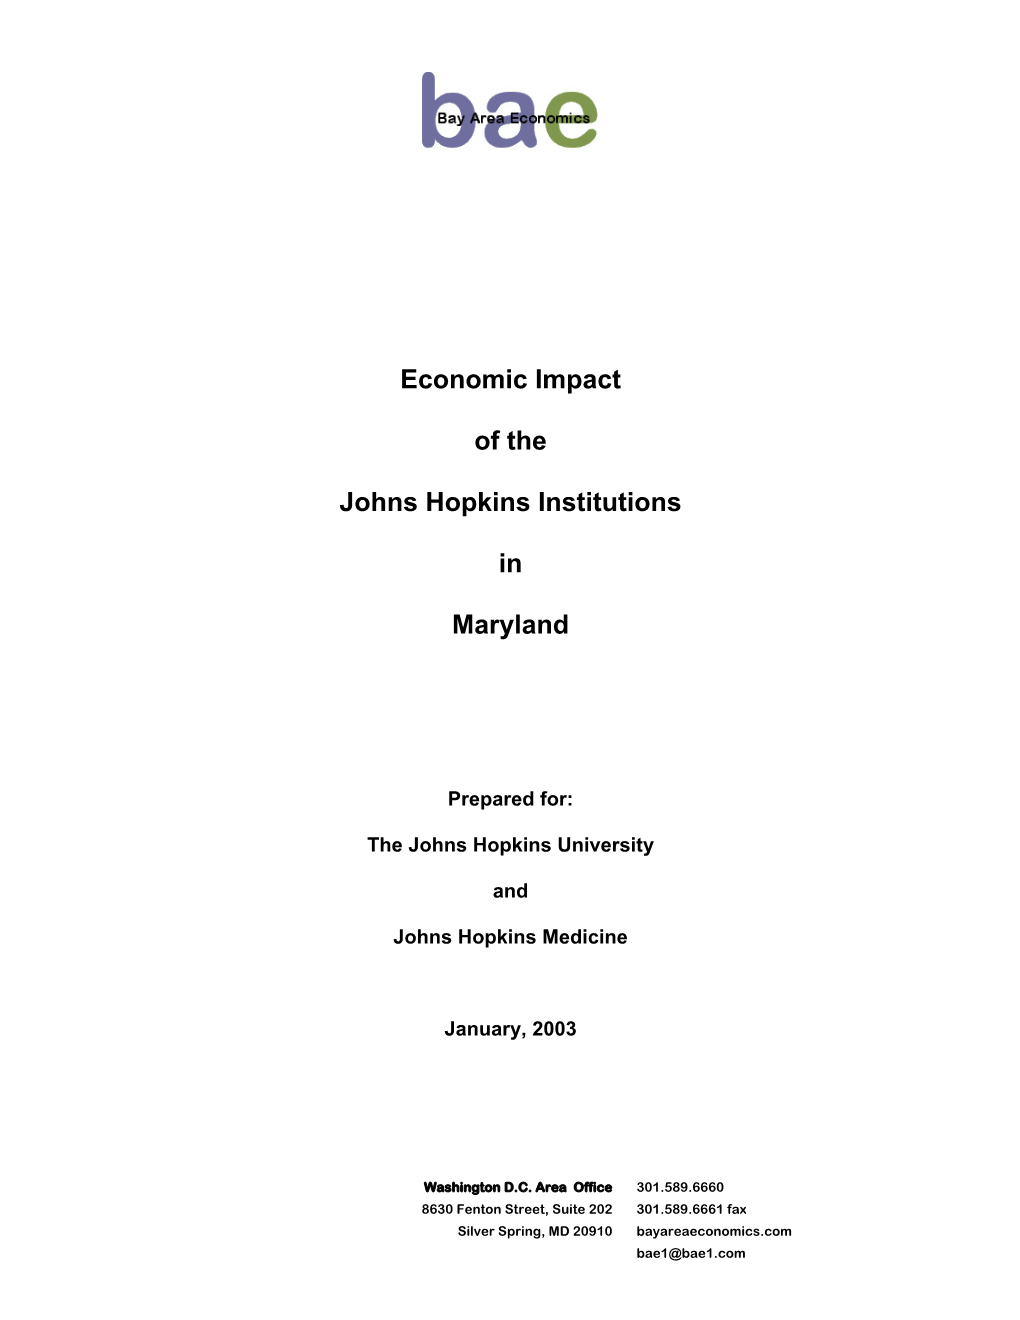 Economic Impact of the Johns Hopkins Institutions in Maryland